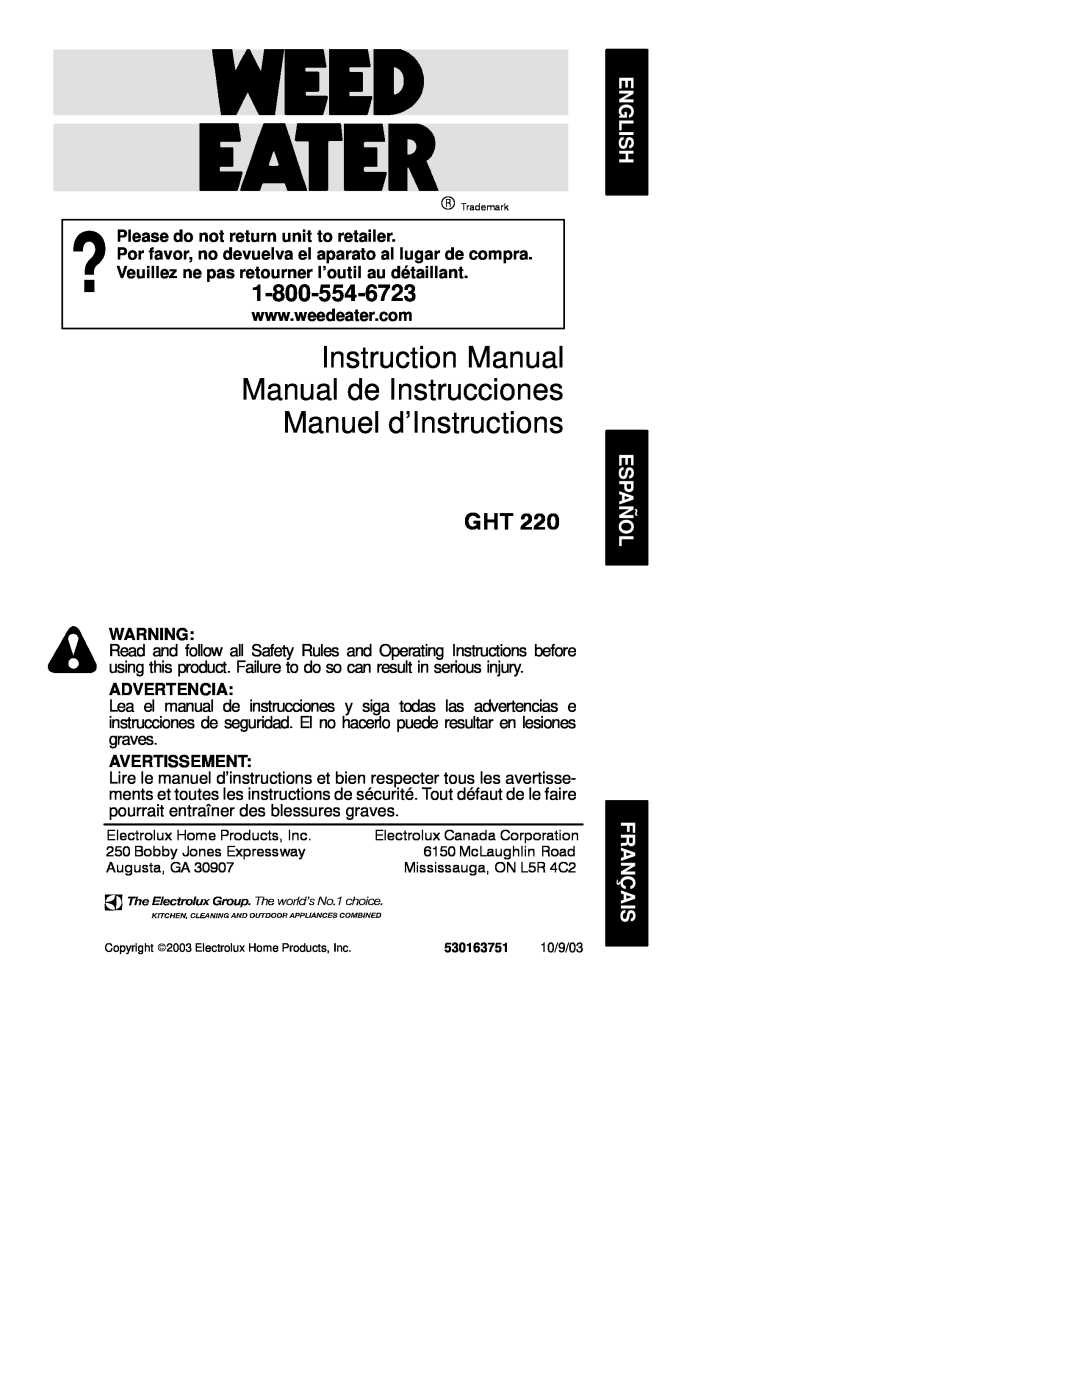 Weed Eater 530163751 instruction manual Please do not return unit to retailer, Advertencia, Avertissement 